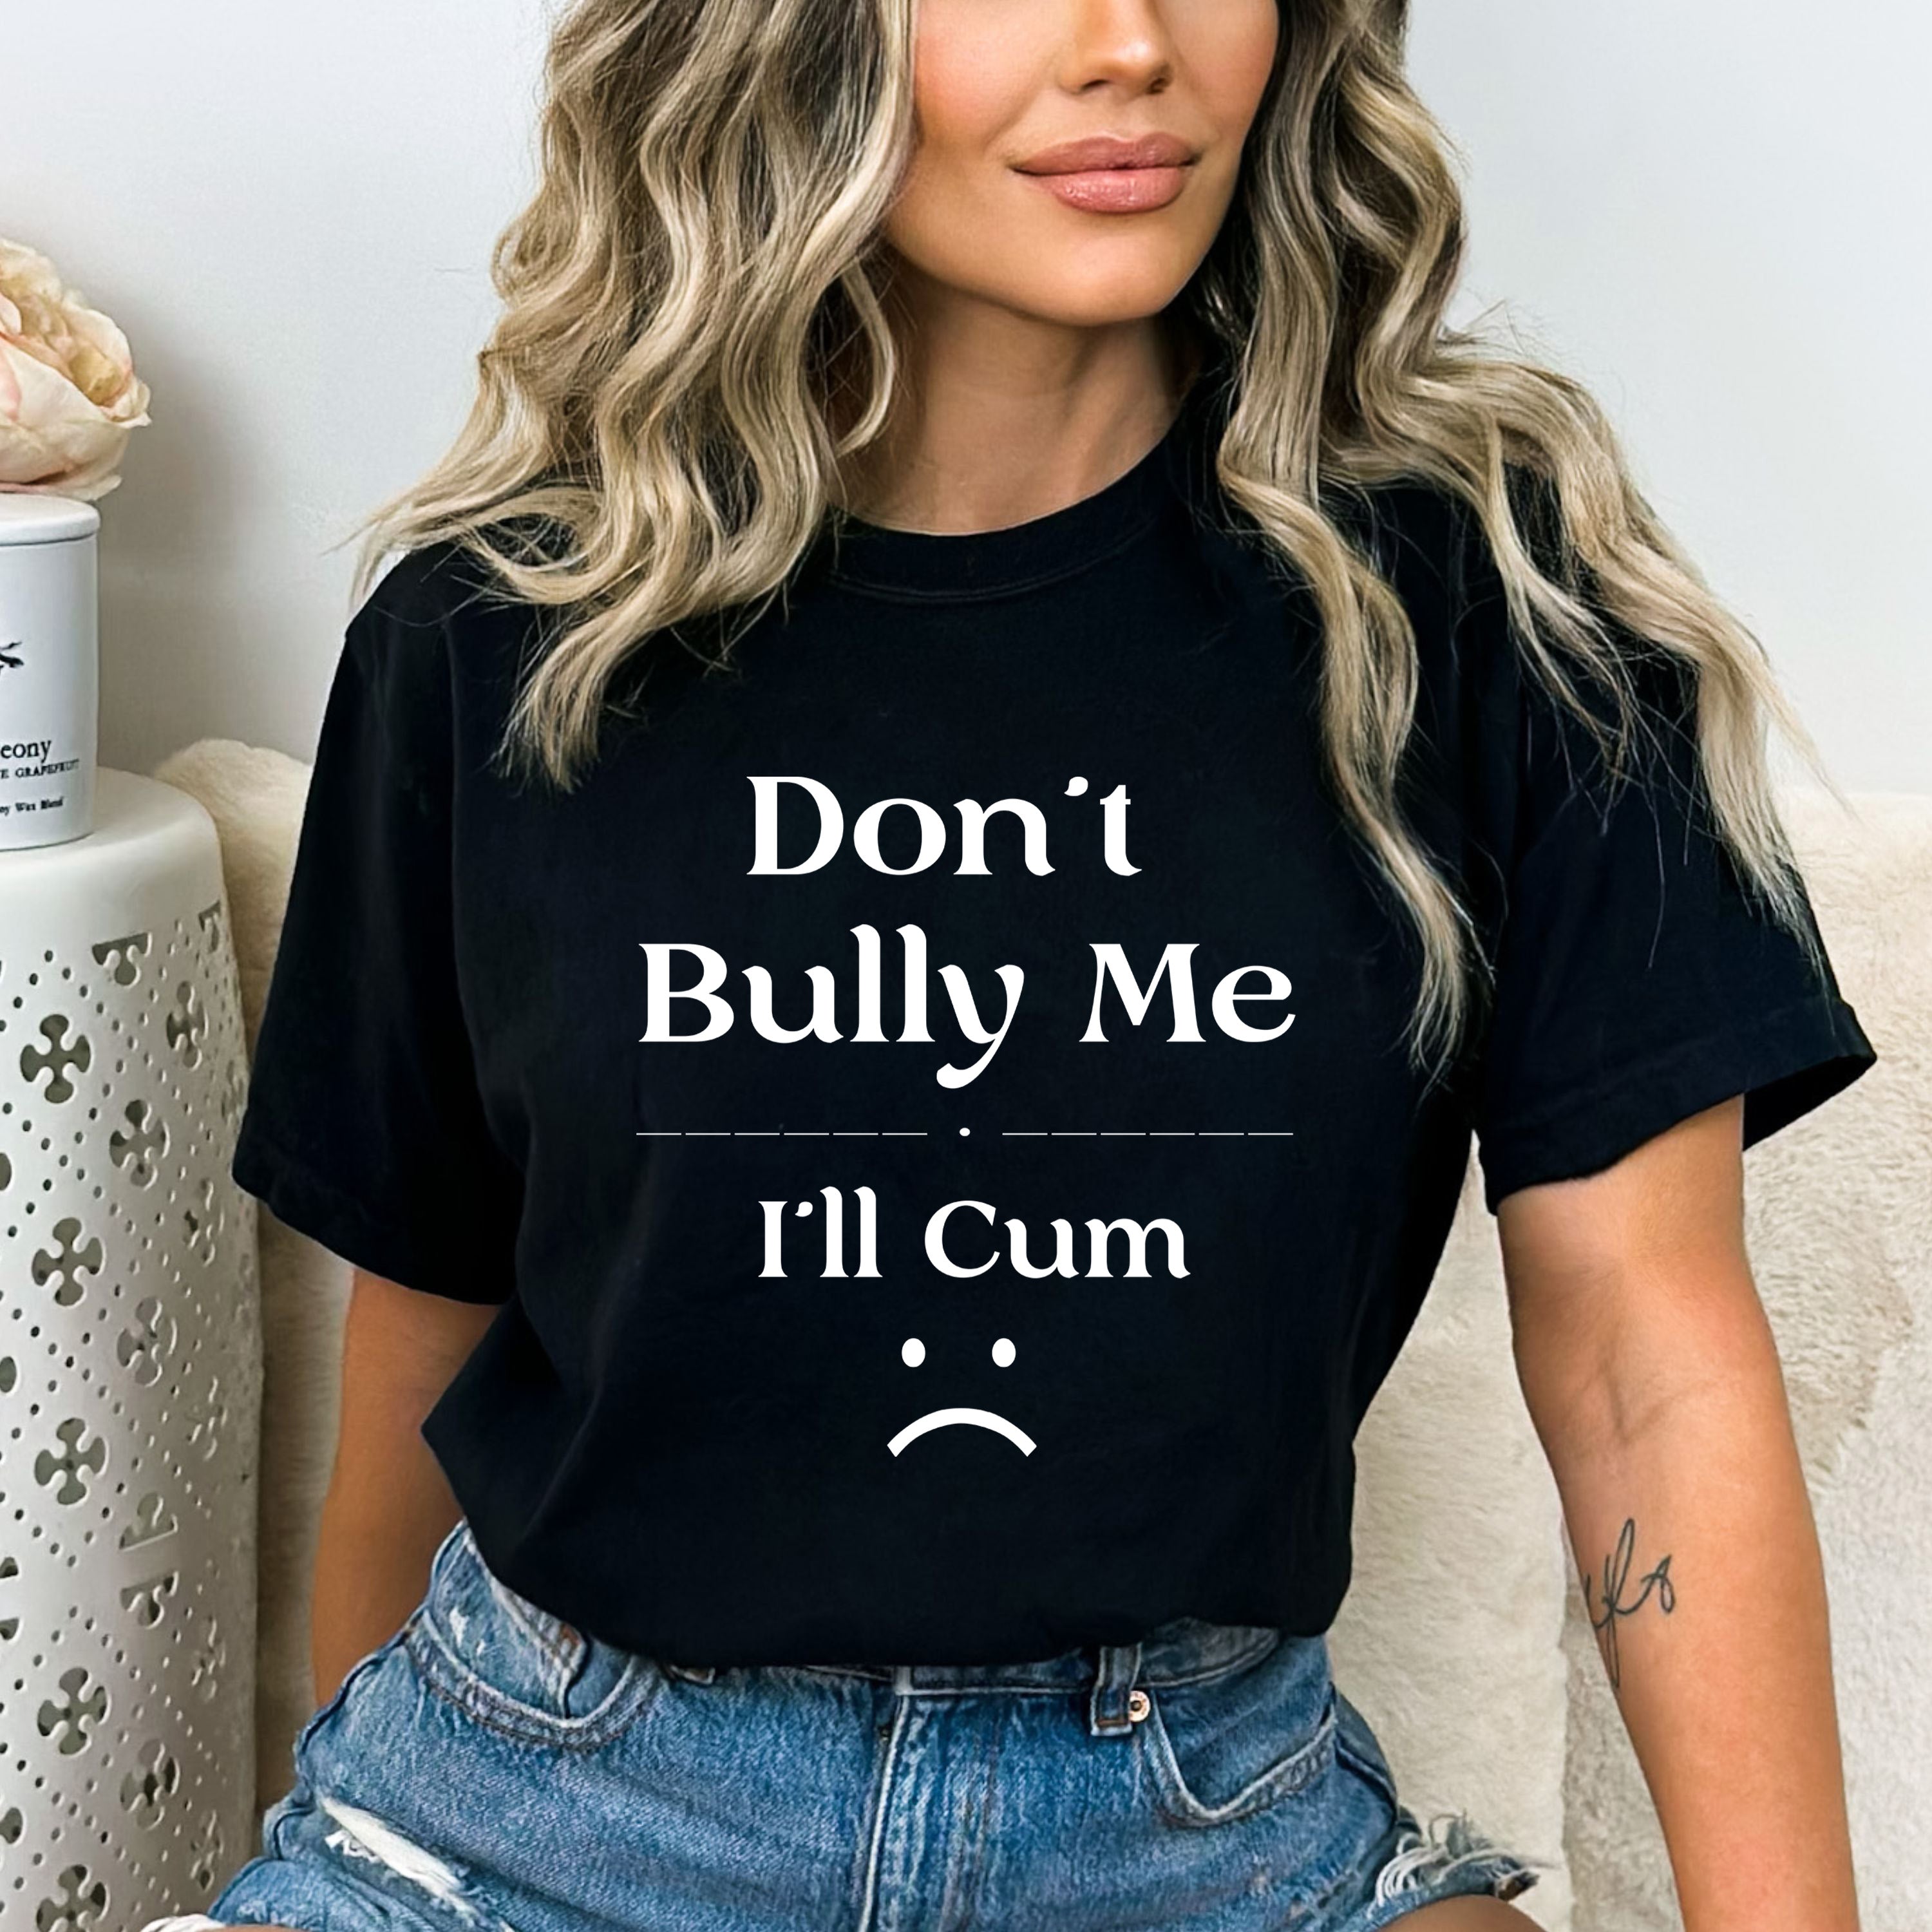 Don't Bully Me - Bella canvas